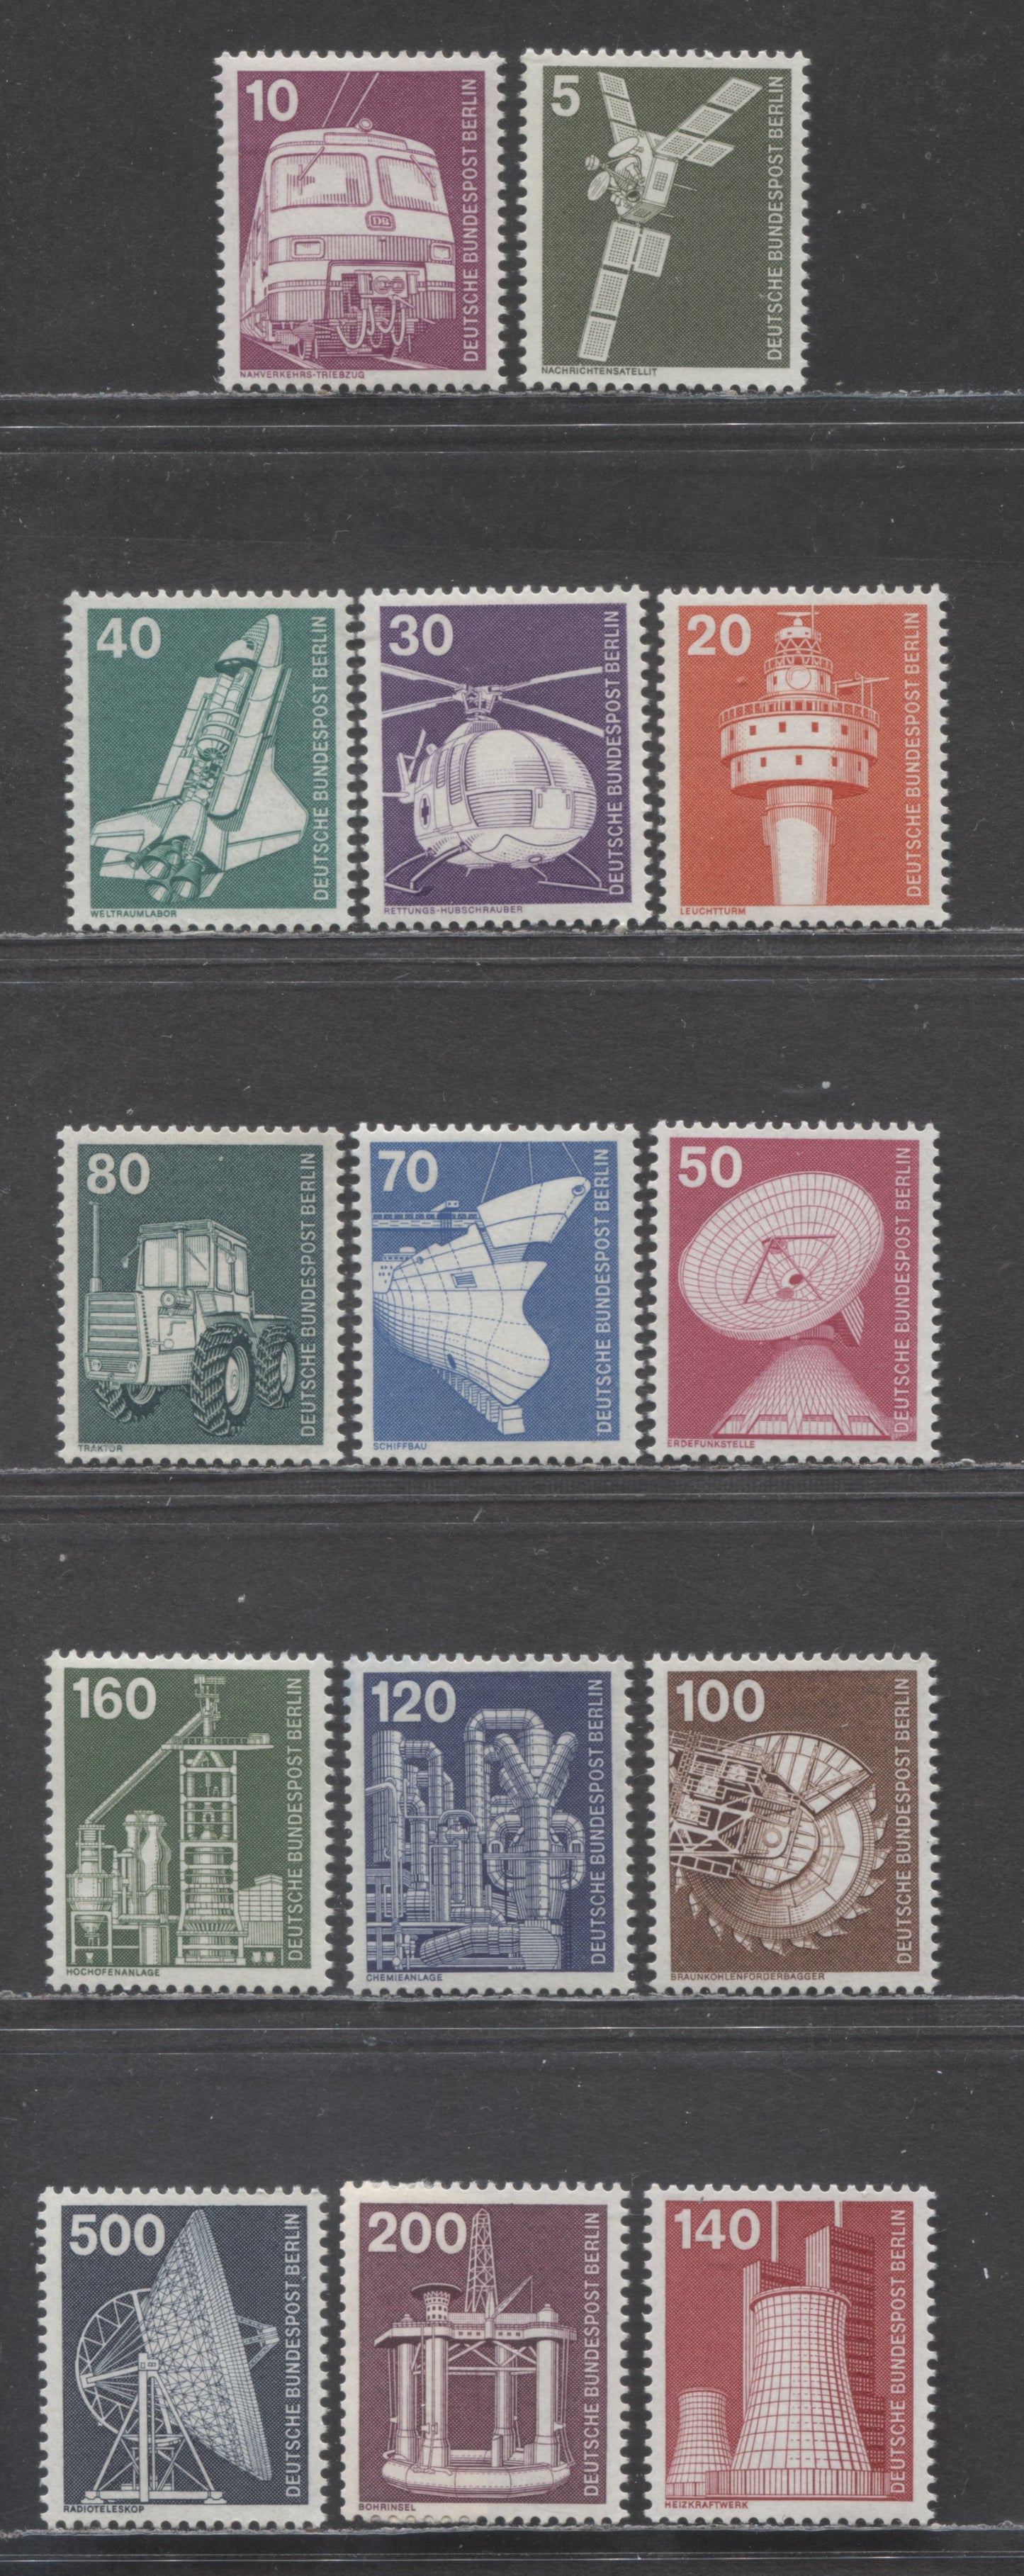 Berlin-Germany SC#9N359/9N376(Mi#494-507) 1975 Industry Definitives Issue, 14 VFNH Singles, Click on Listing to See ALL Pictures, Estimated Value $20 USD